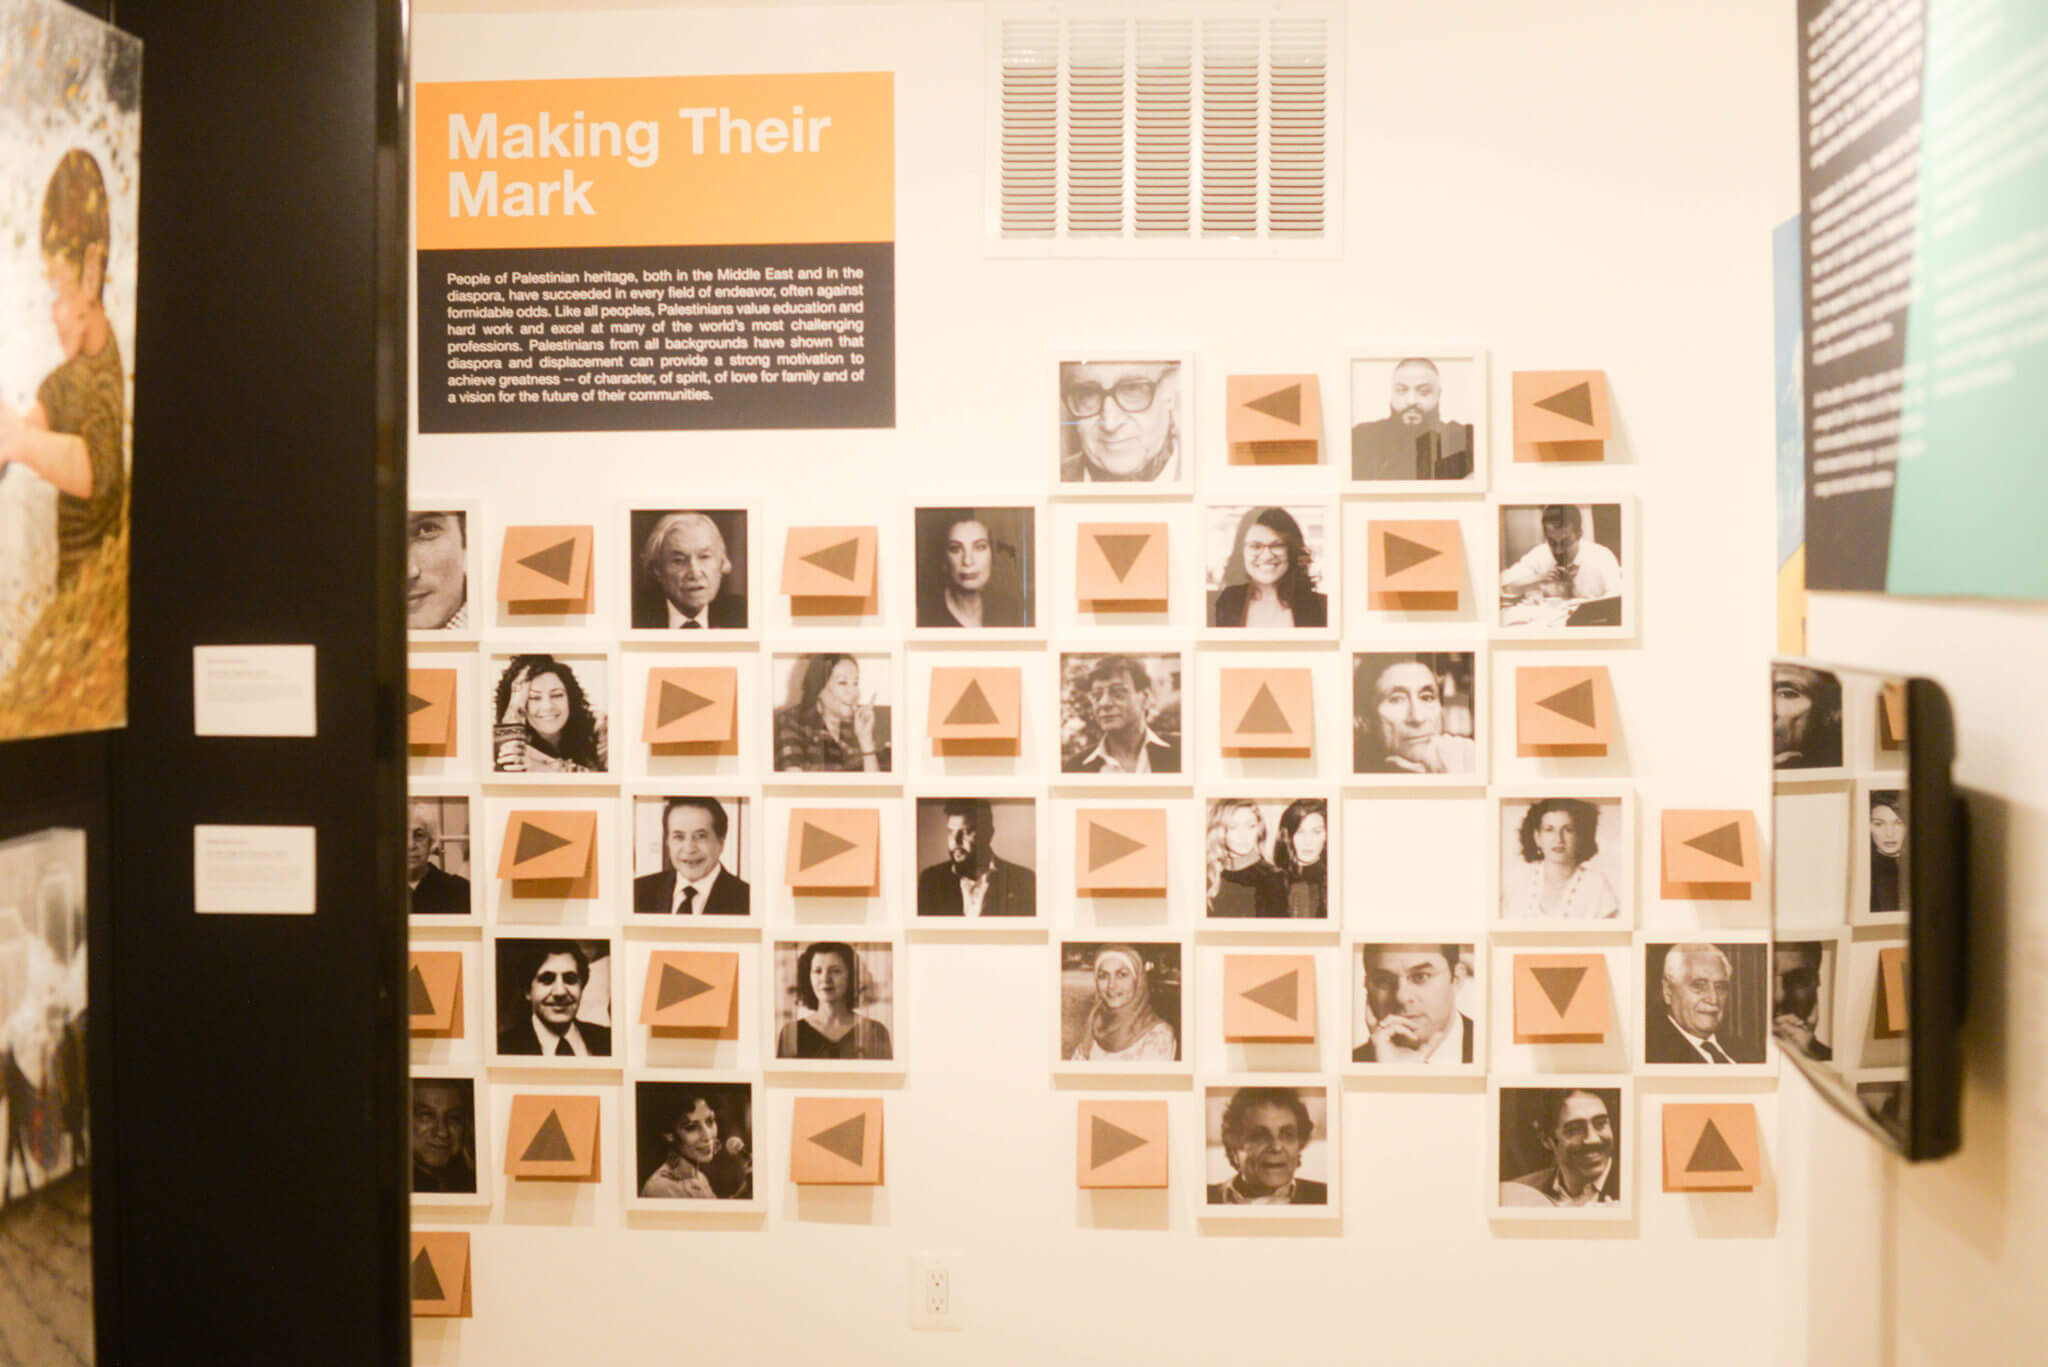 Display from the "Making Their Mark" exhibit at the Museum of the Palestinian People. (Photo: Ana-Mation Photography)